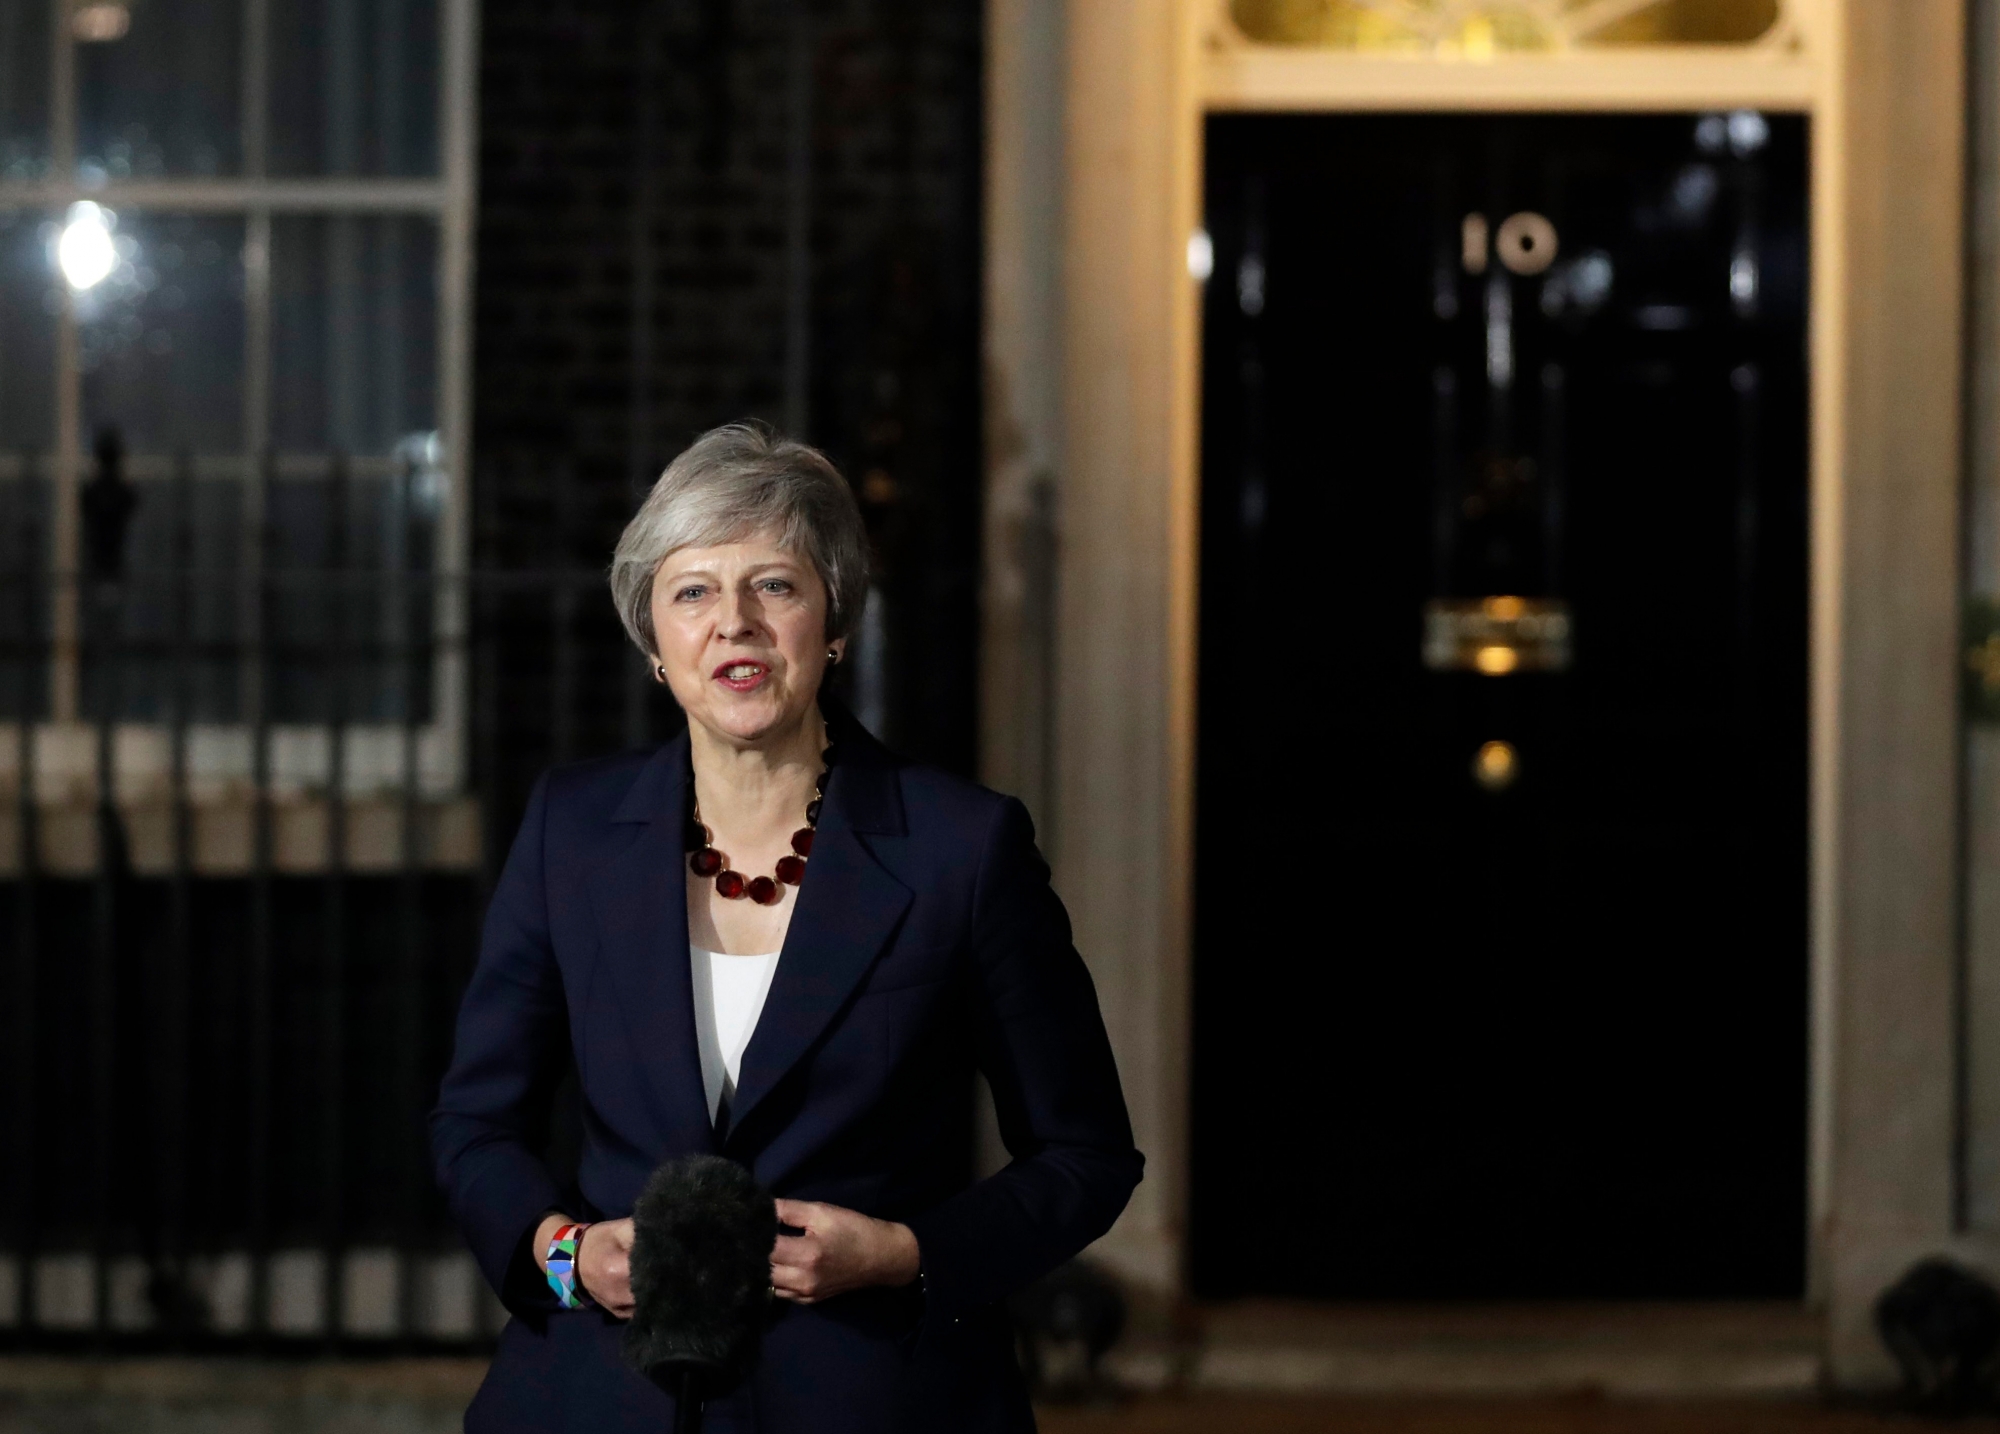 Britain's Prime Minister Theresa May delivers a speech outside 10 Downing Street in London, Wednesday, Nov. 14, 2018. British Prime Minister Theresa May says Cabinet agrees draft Brexit deal with European Union after 'impassioned' debate. (AP Photo/Matt Dunham) Britain Brexit